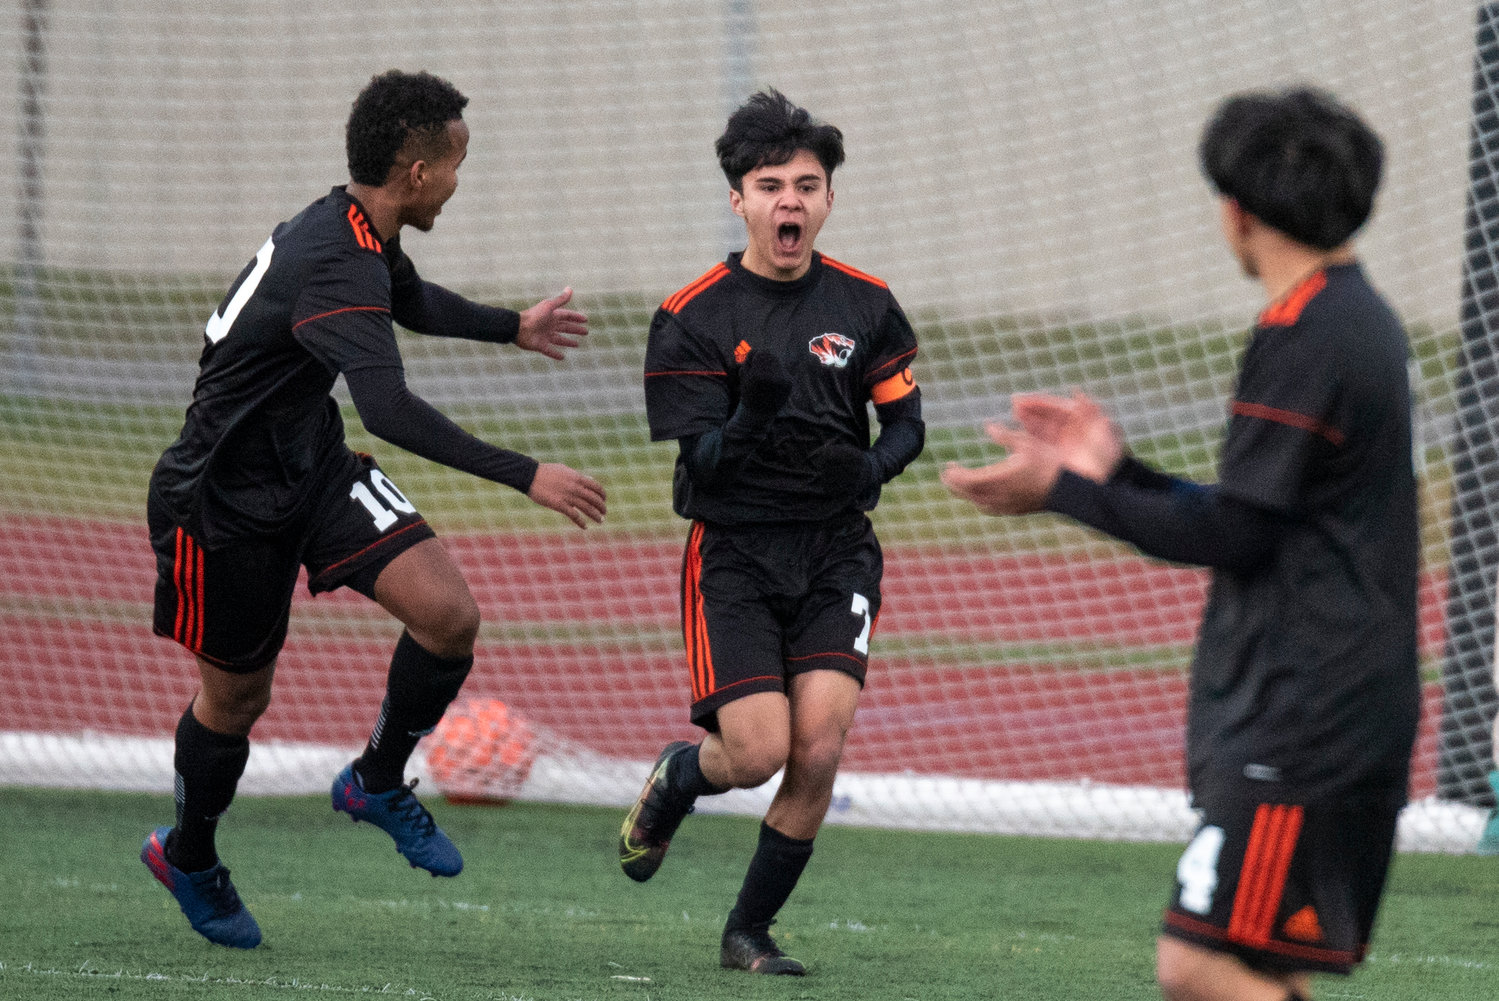 Centralia's Kilmer Alverto-Gabarrette (7) yells in celebration after scoring a goal in the 3rd minute during a home game against Rochester on Tuesday, April 12.